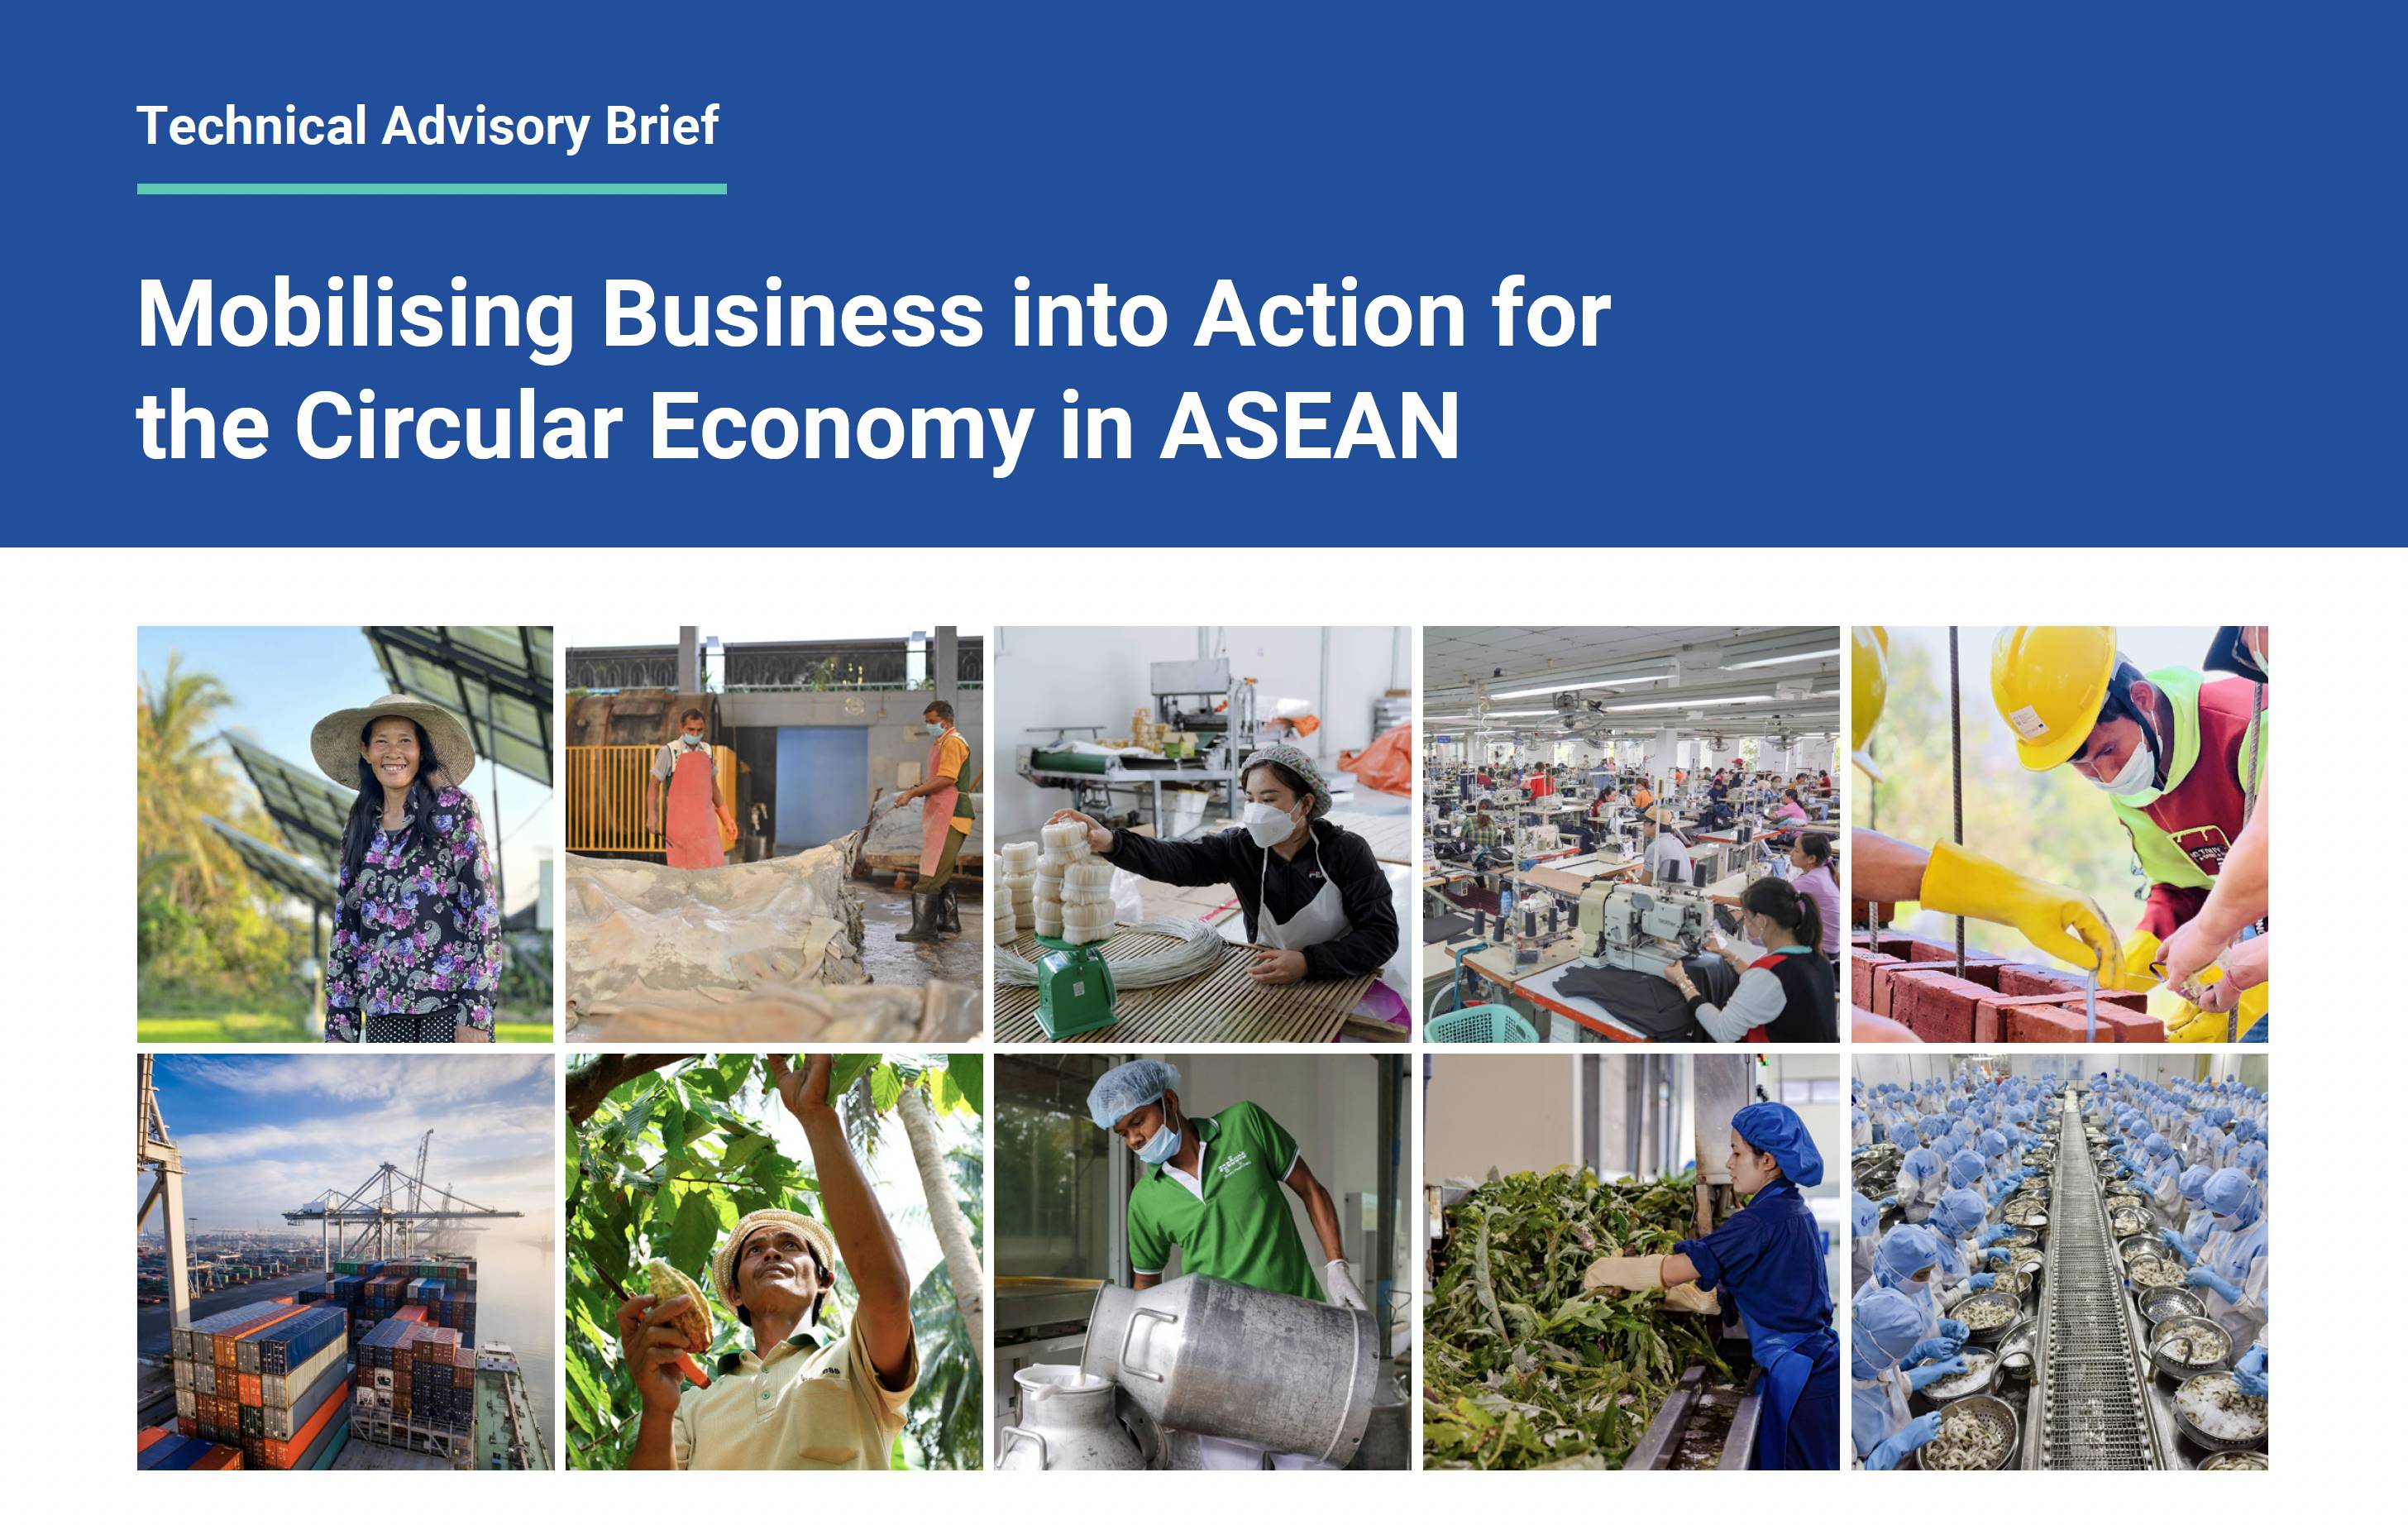 Mobilising Business into Action for the Circular Economy in ASEAN